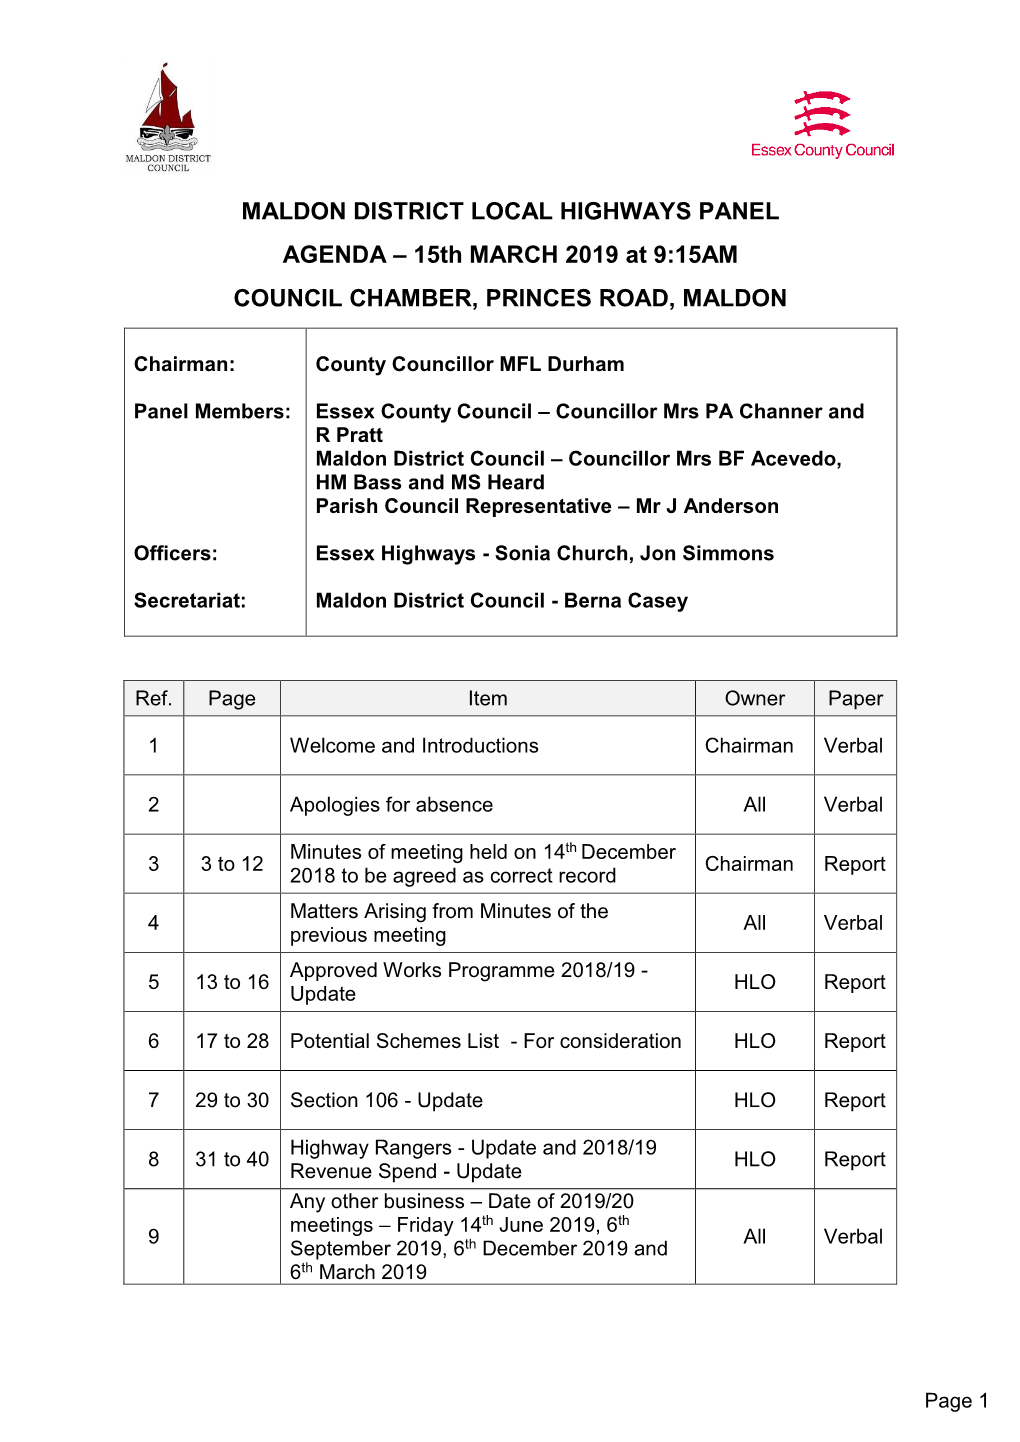 MALDON DISTRICT LOCAL HIGHWAYS PANEL AGENDA – 15Th MARCH 2019 at 9:15AM COUNCIL CHAMBER, PRINCES ROAD, MALDON